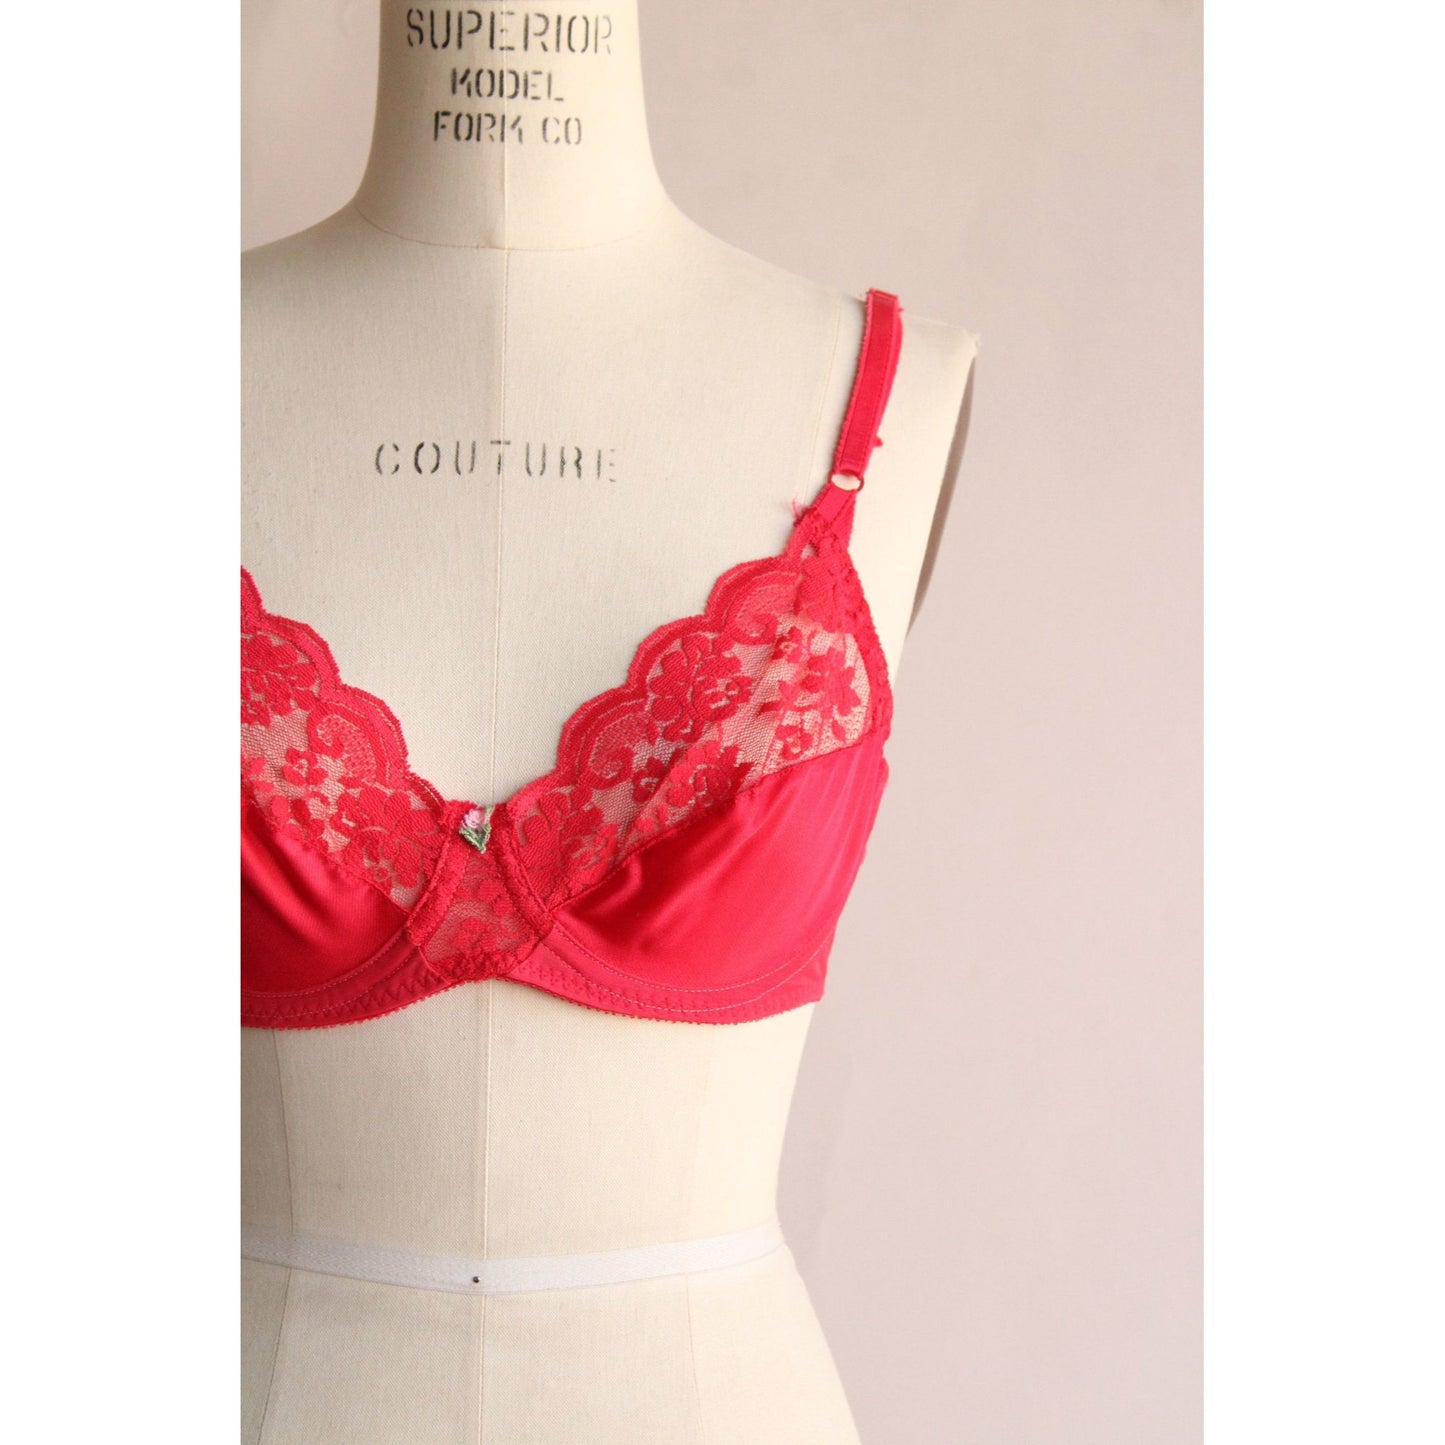 Vintage 1960s 1970s Red Lace Bra by Maidenform Chantilly, Size 36B